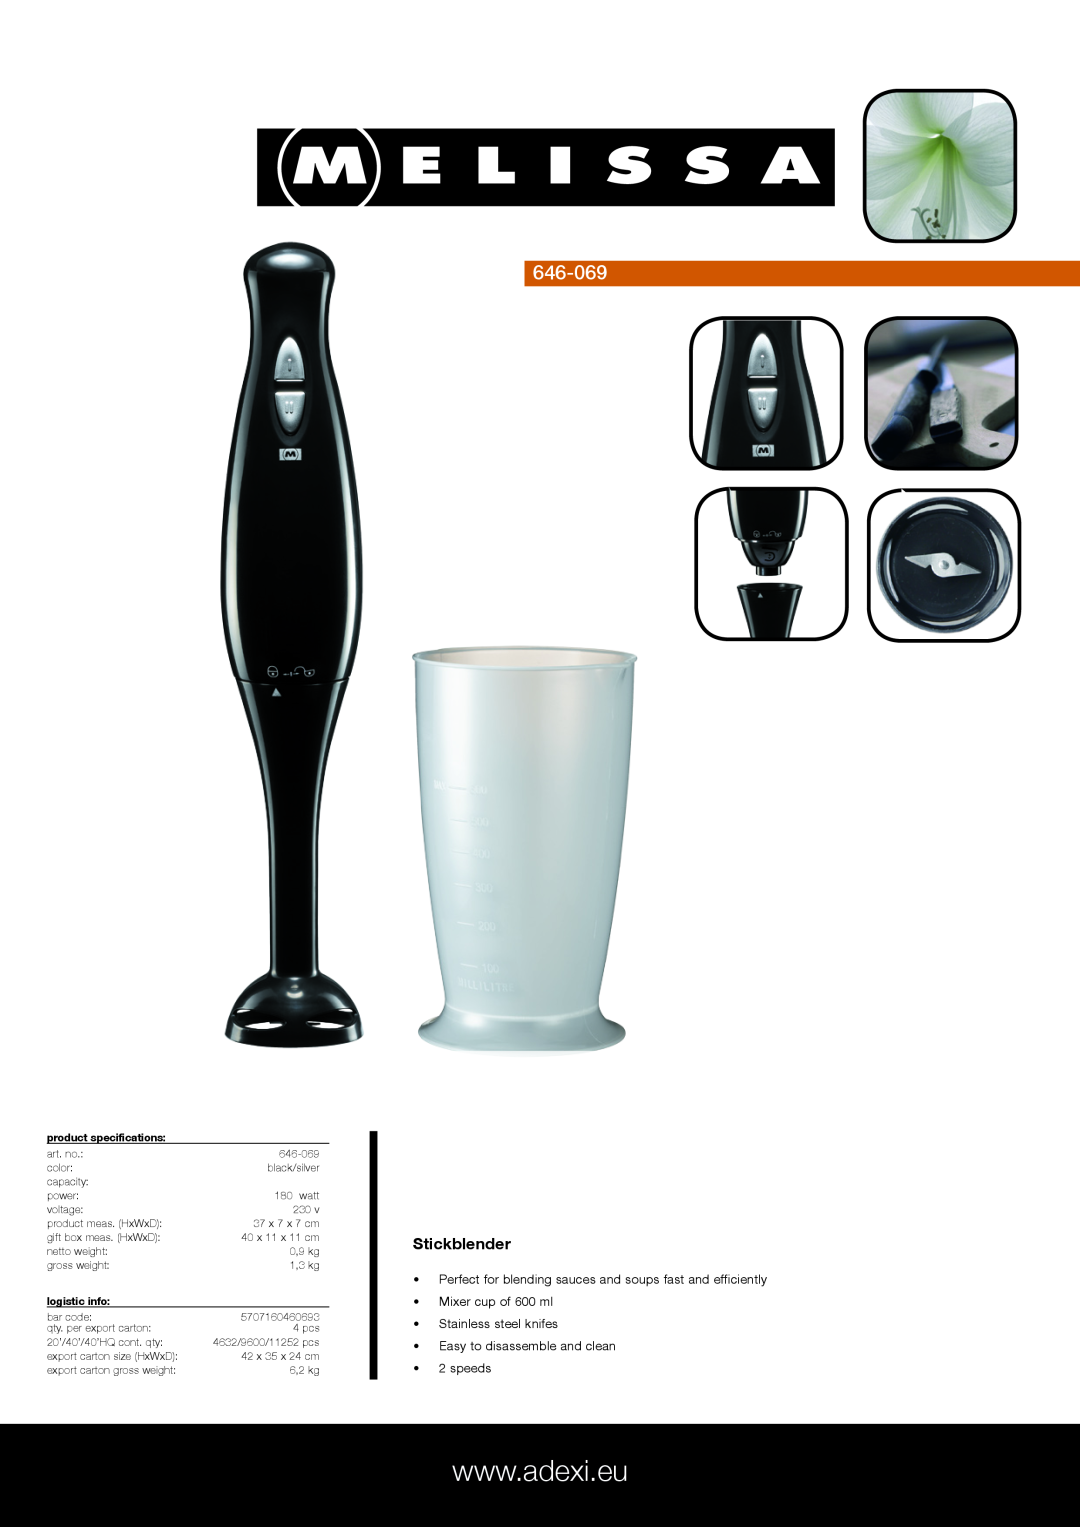 Melissa 646-069 specifications Stickblender, Mixer cup of 600 ml Stainless steel knifes, product specifications 